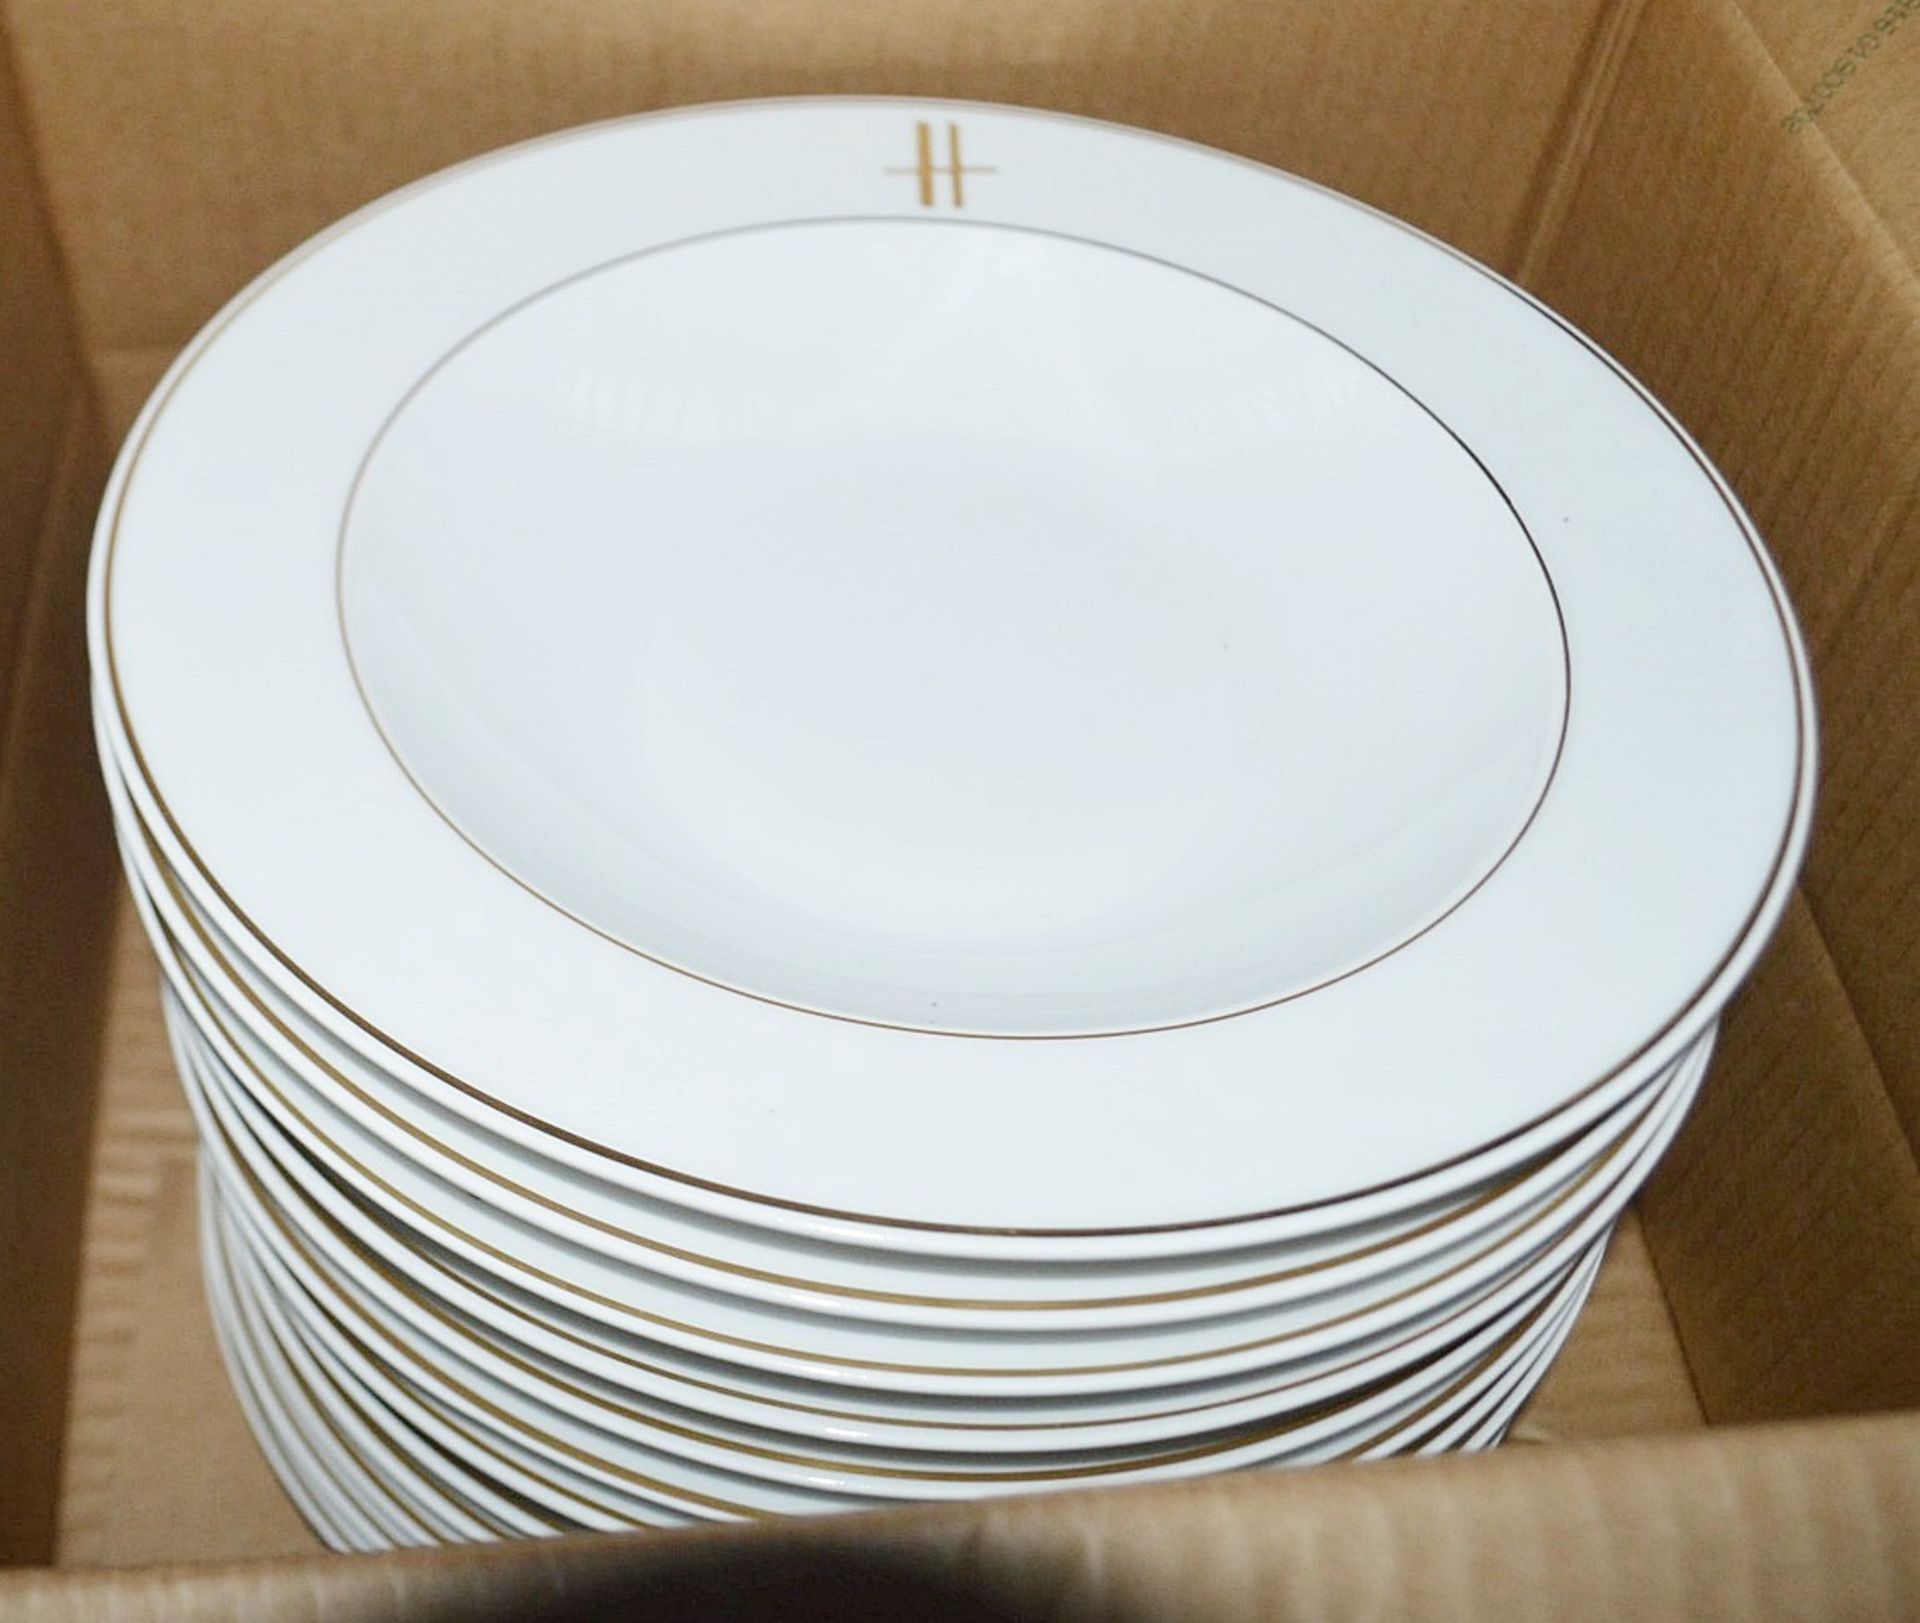 12 x PILLIVUYT Porcelain Pasta / Soup Plates In White Featuring 'Famous Branding' In Gold - Image 2 of 5